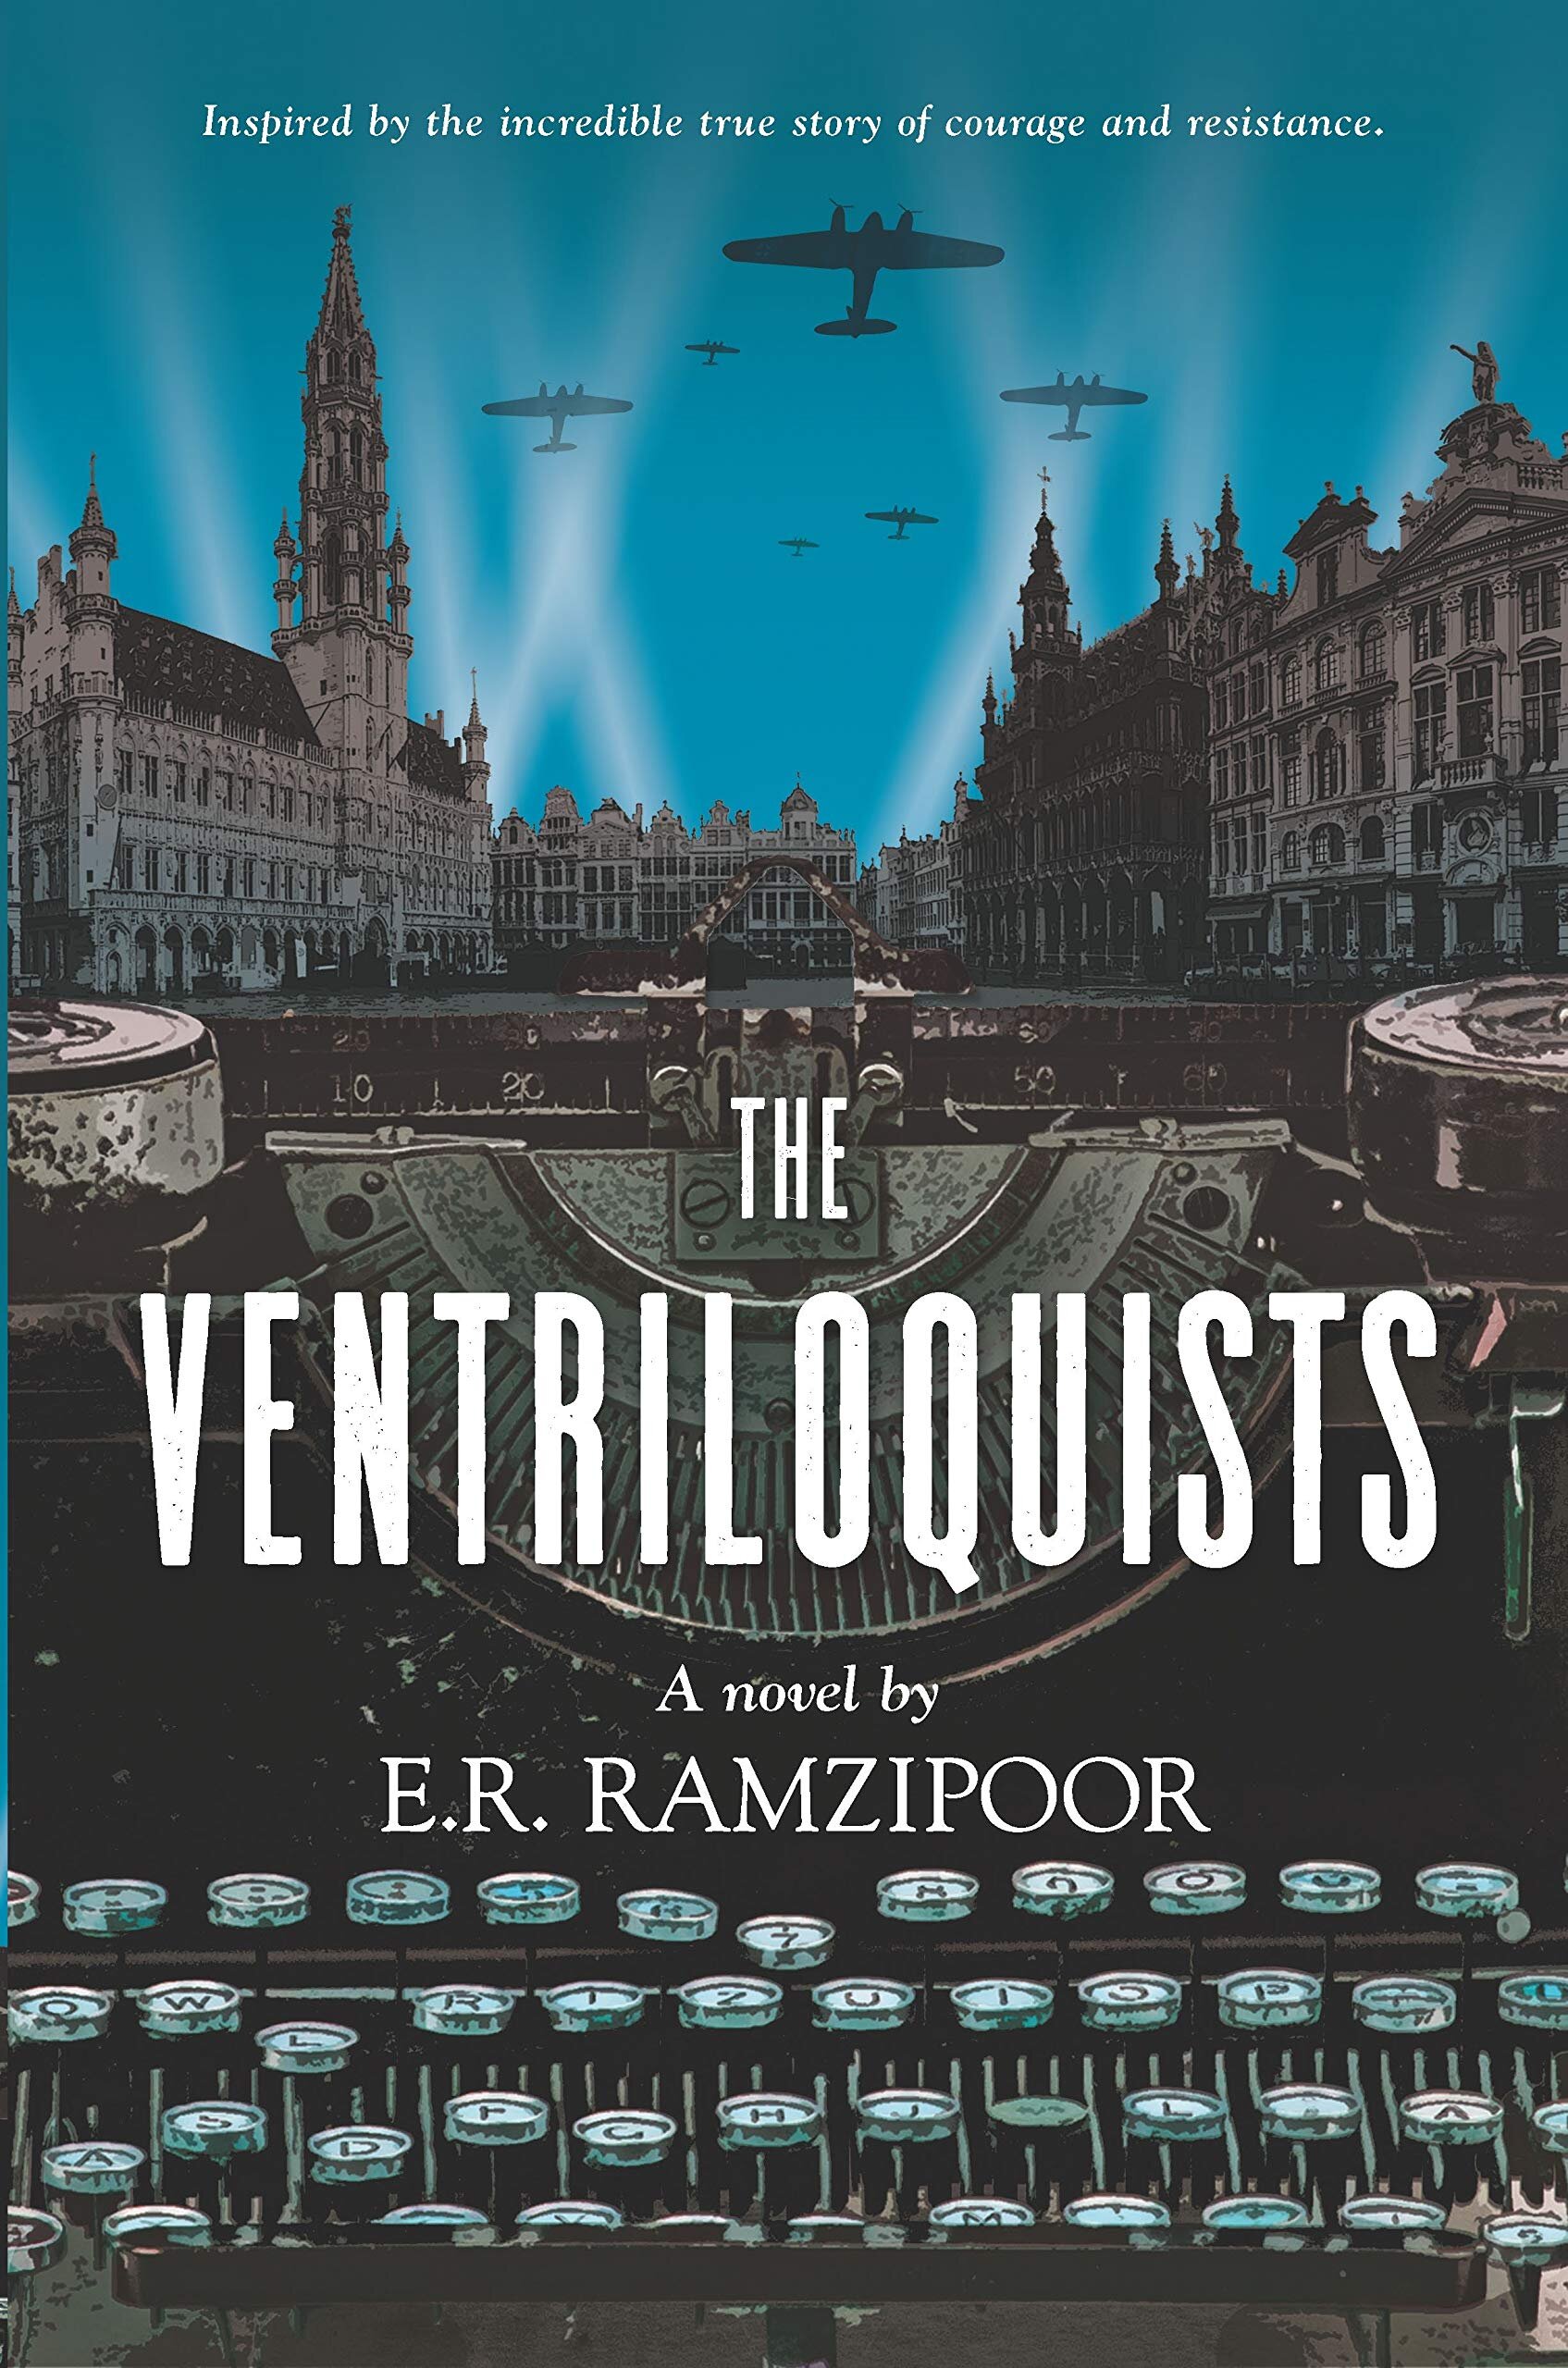 Historical Fiction The Ventriloquists by E. R. Ramzipoor.jpg